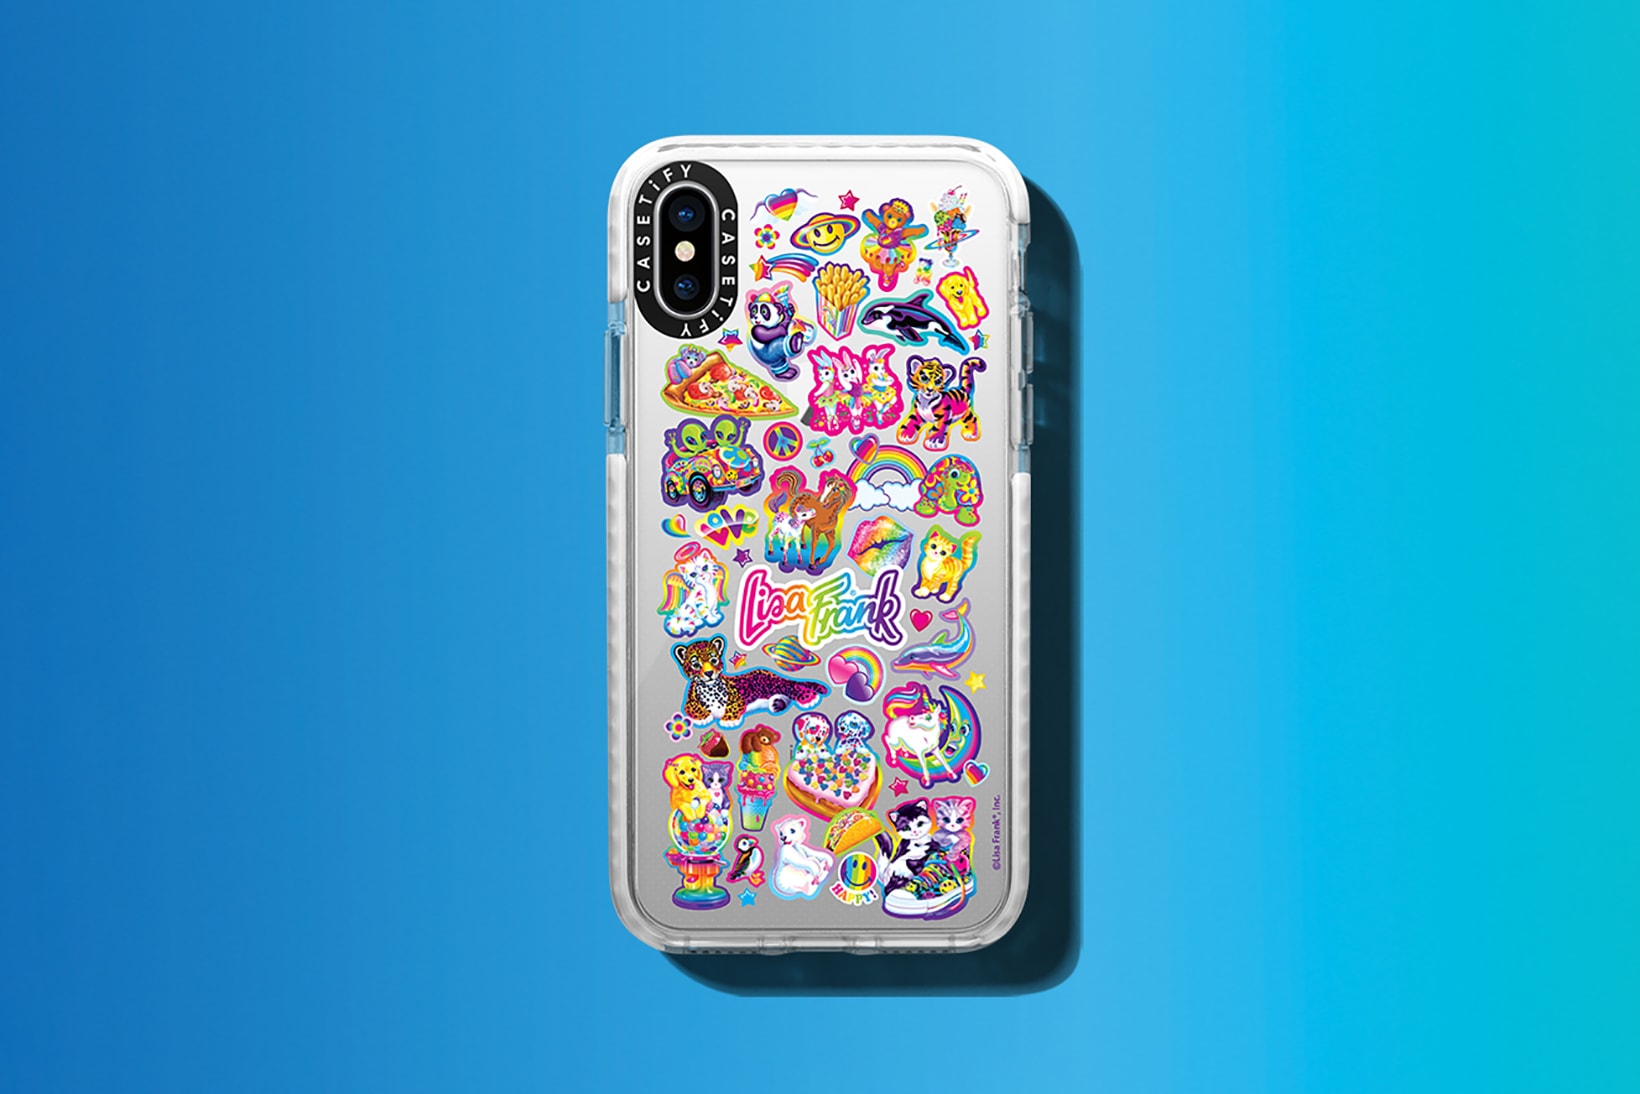 casetify lisa frank collaboration phone cases apple iphone samsung android phone airpods macbook ipad accessories tech stickers throwback childhood